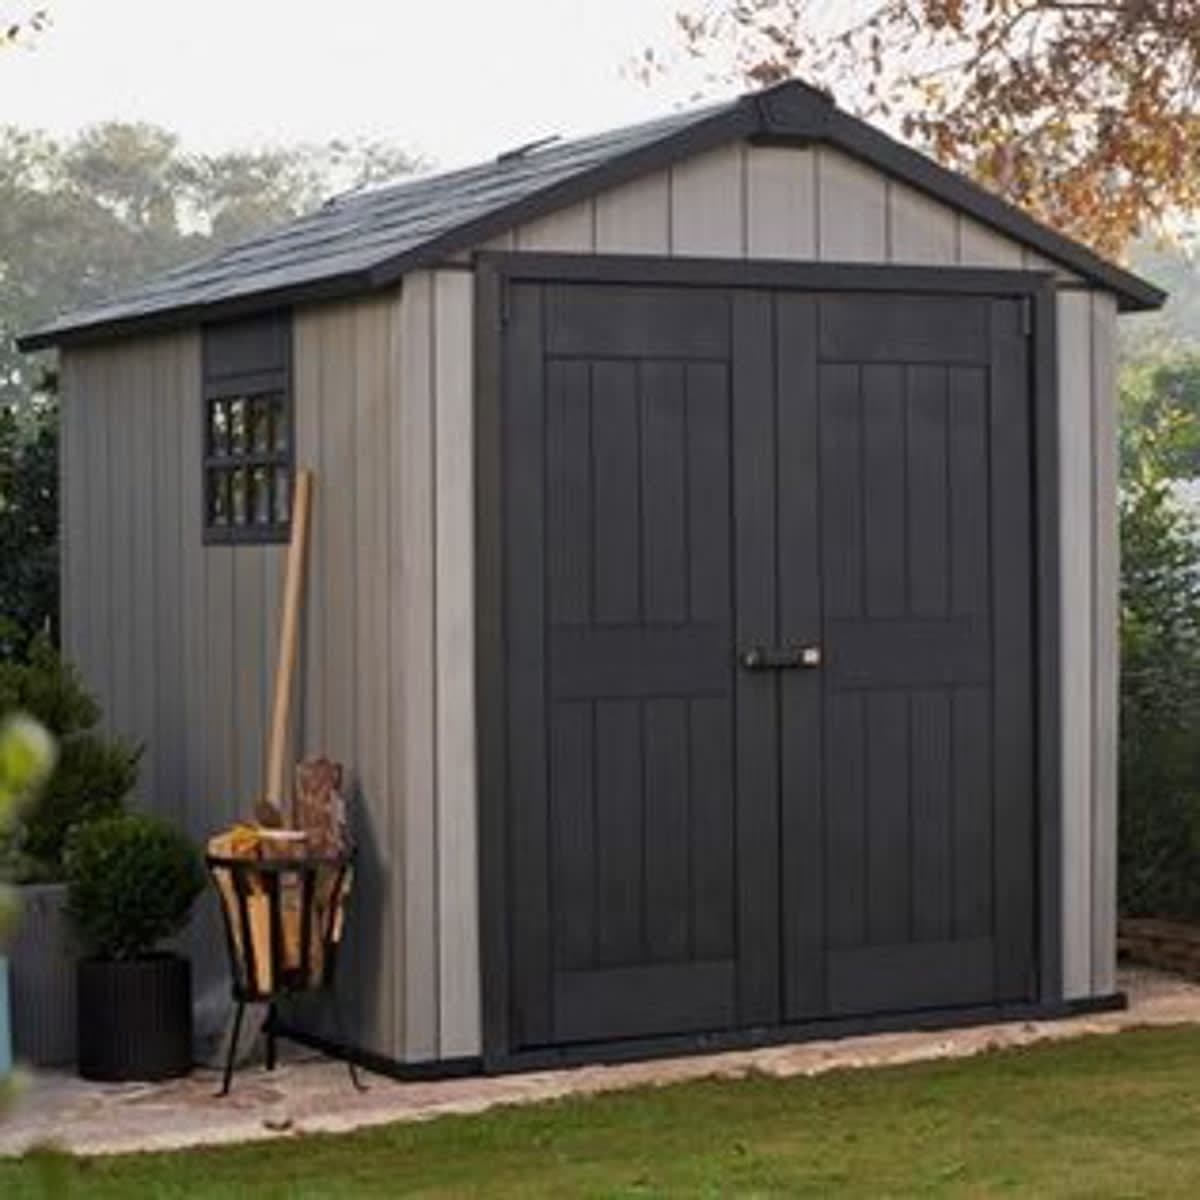 GARDEN SHED OAKLAND 7511 THICKNESS 20MM EXTERNAL DIMENSIONS 342X210X242H FLOOR INCLUDED